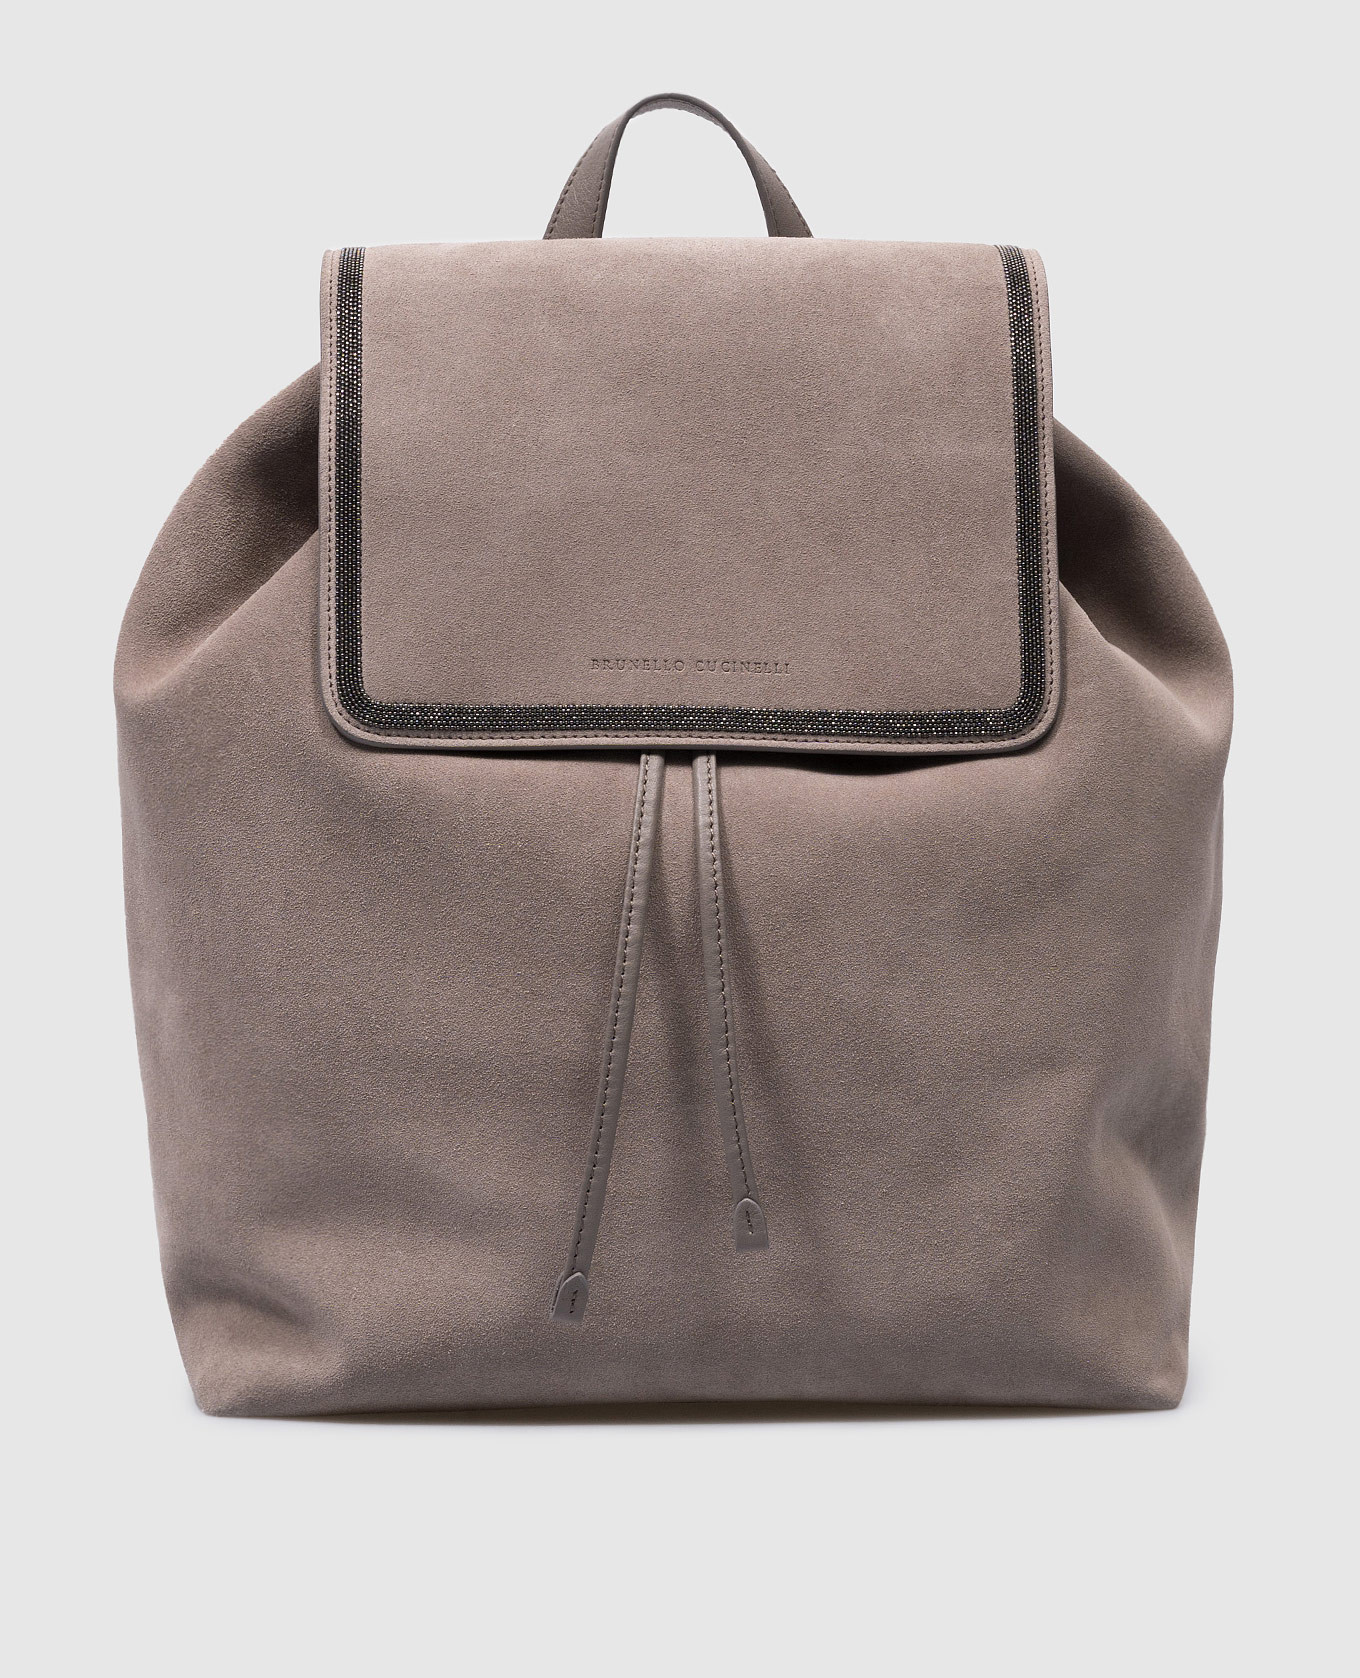 Gray suede backpack with monil chain